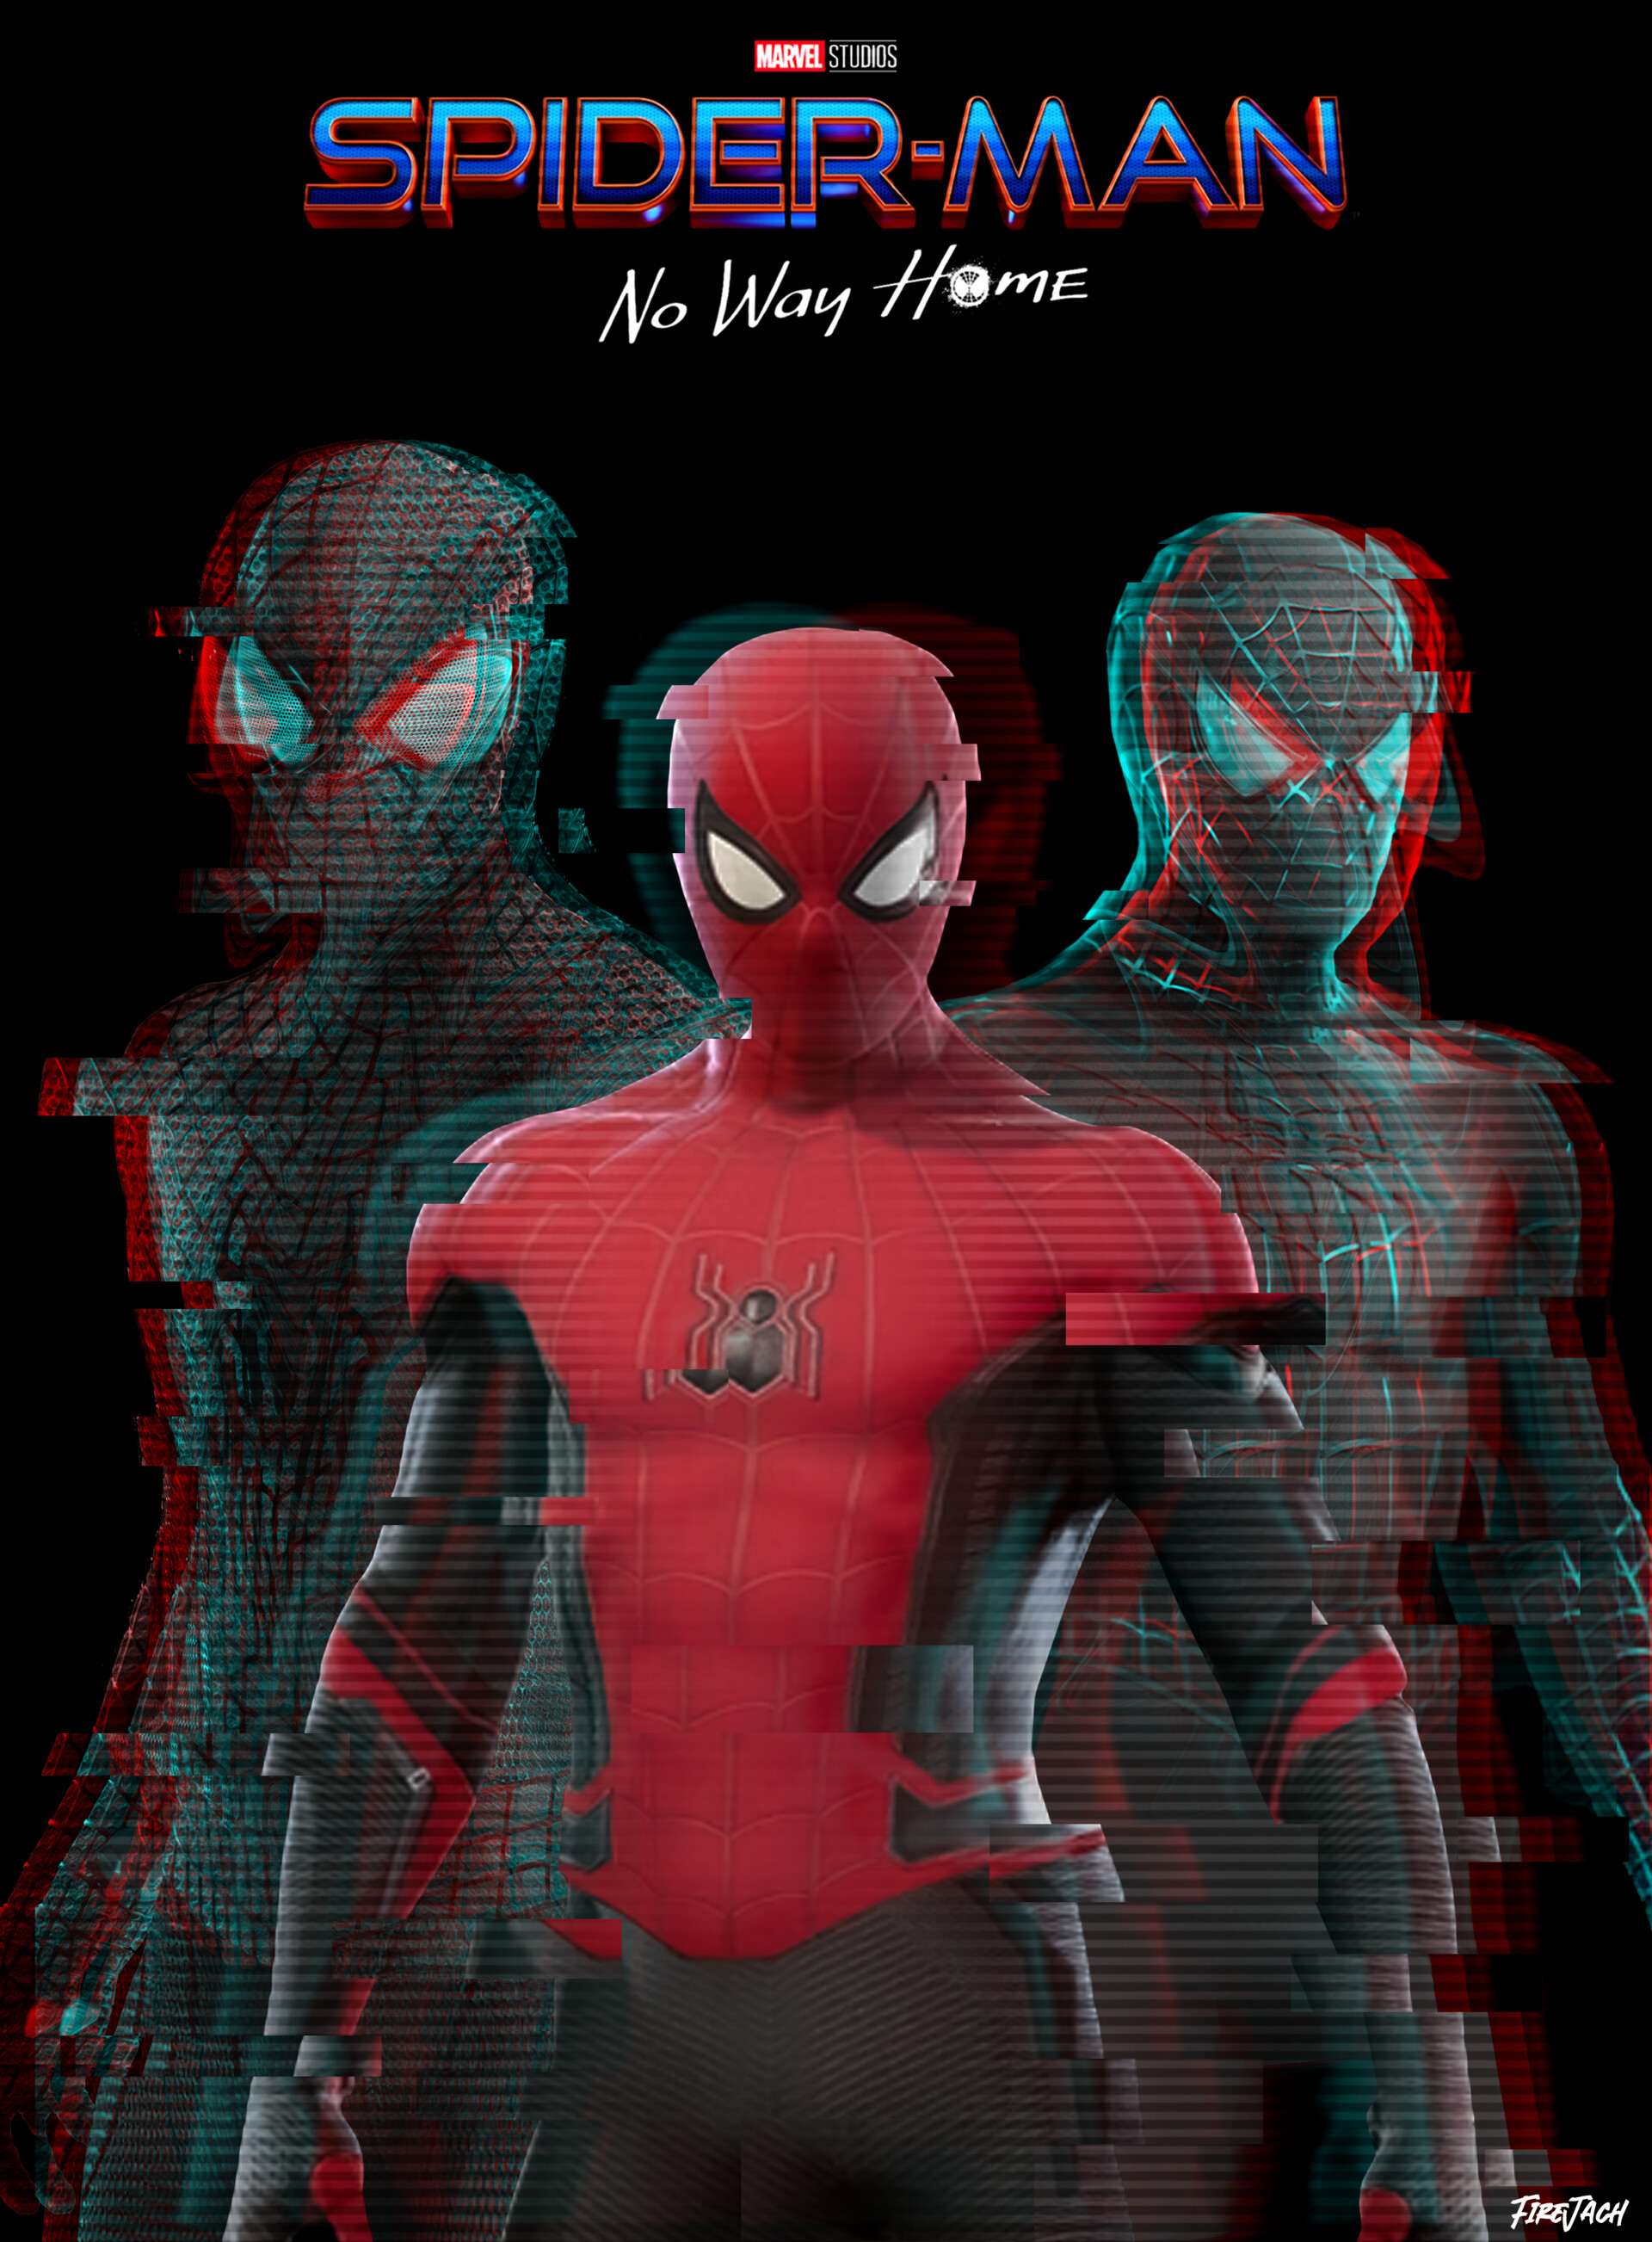 ArtStation - Spider-Man No Way Home Fanmade Poster